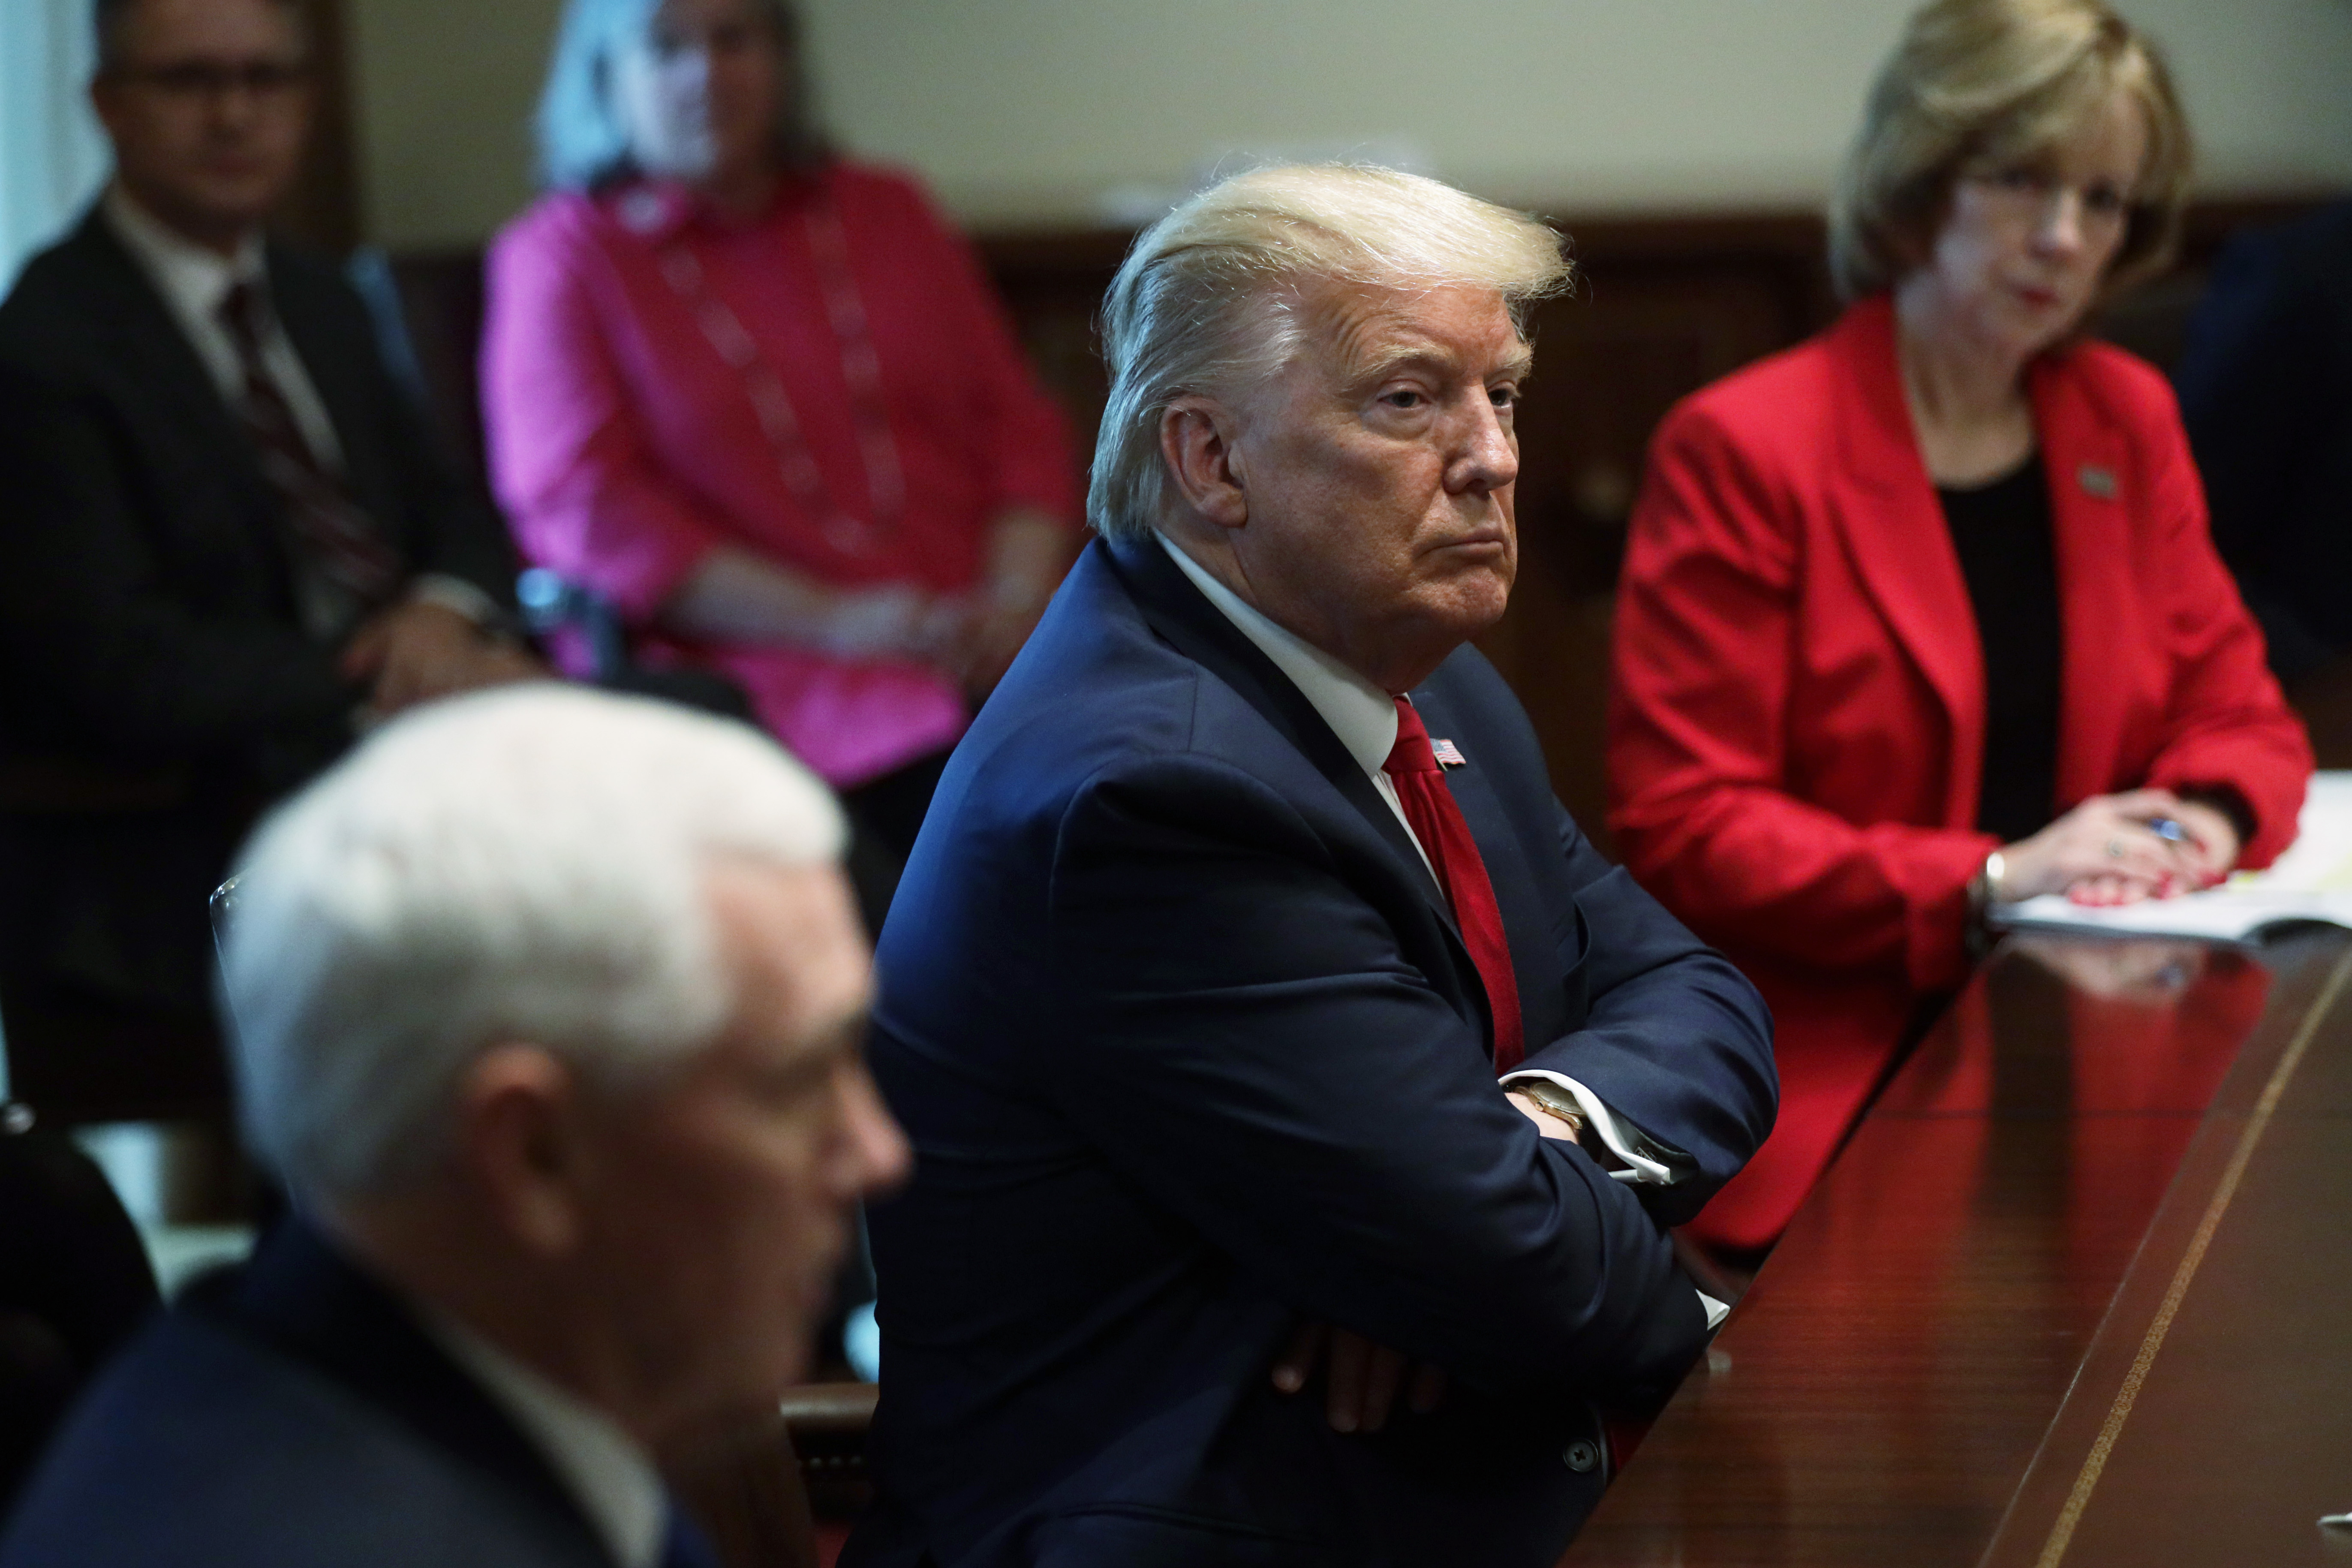 WASHINGTON, DC - MARCH 18: U.S. President Donald Trump listens during a meeting with representatives of American nurses at the Cabinet Room of the White House March 18, 2020 in Washington, DC. President Trump discussed with nurse representatives on combatting the COVID-19 pandemic. (Photo by Alex Wong/Getty Images)